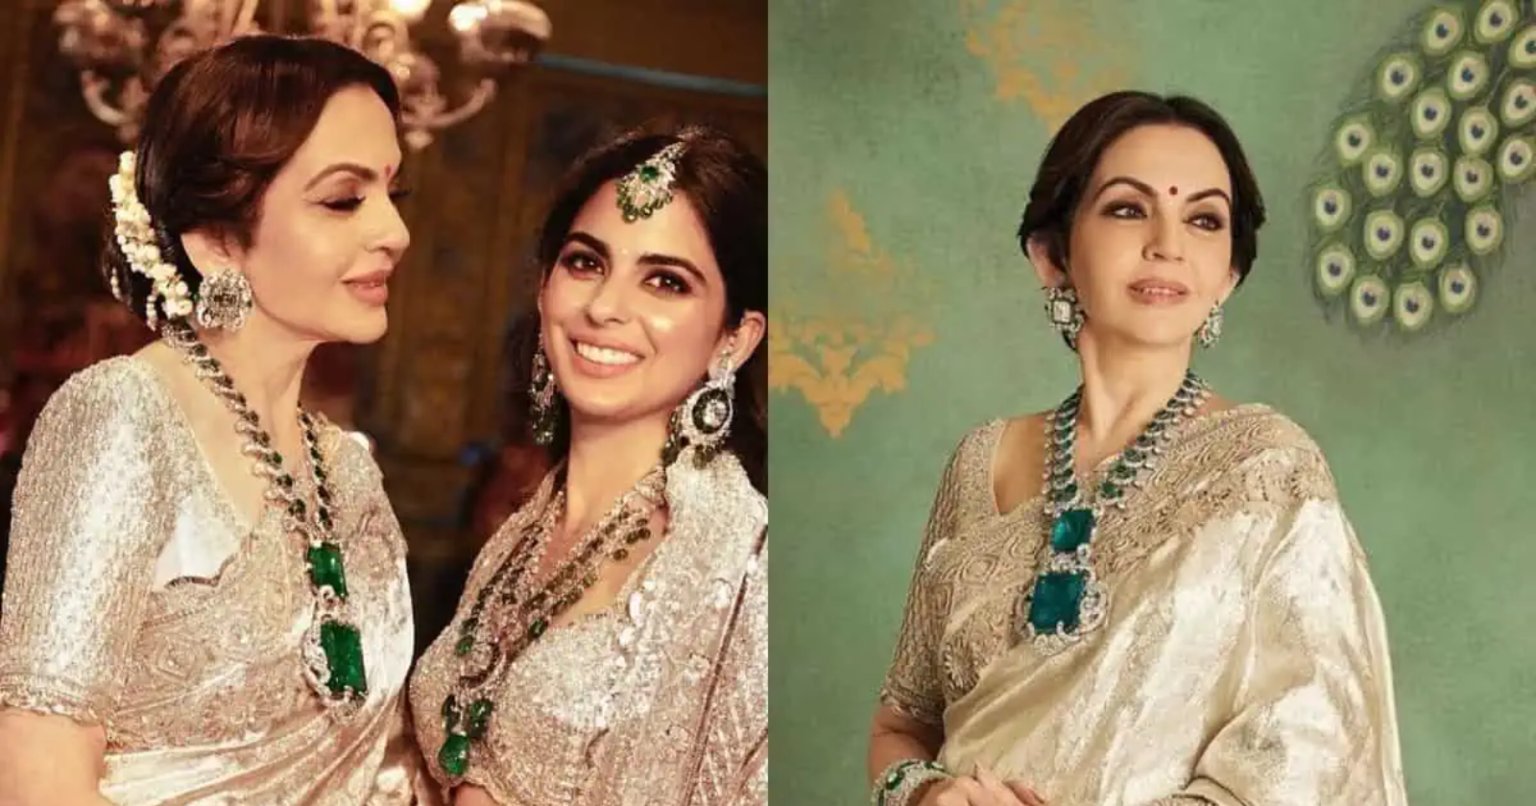 [WATCH]: Harsh Goenka Shares a Video of Nita Ambani’s 500-Crore Emerald Necklace Replica Selling at This Price, Video Goes Viral